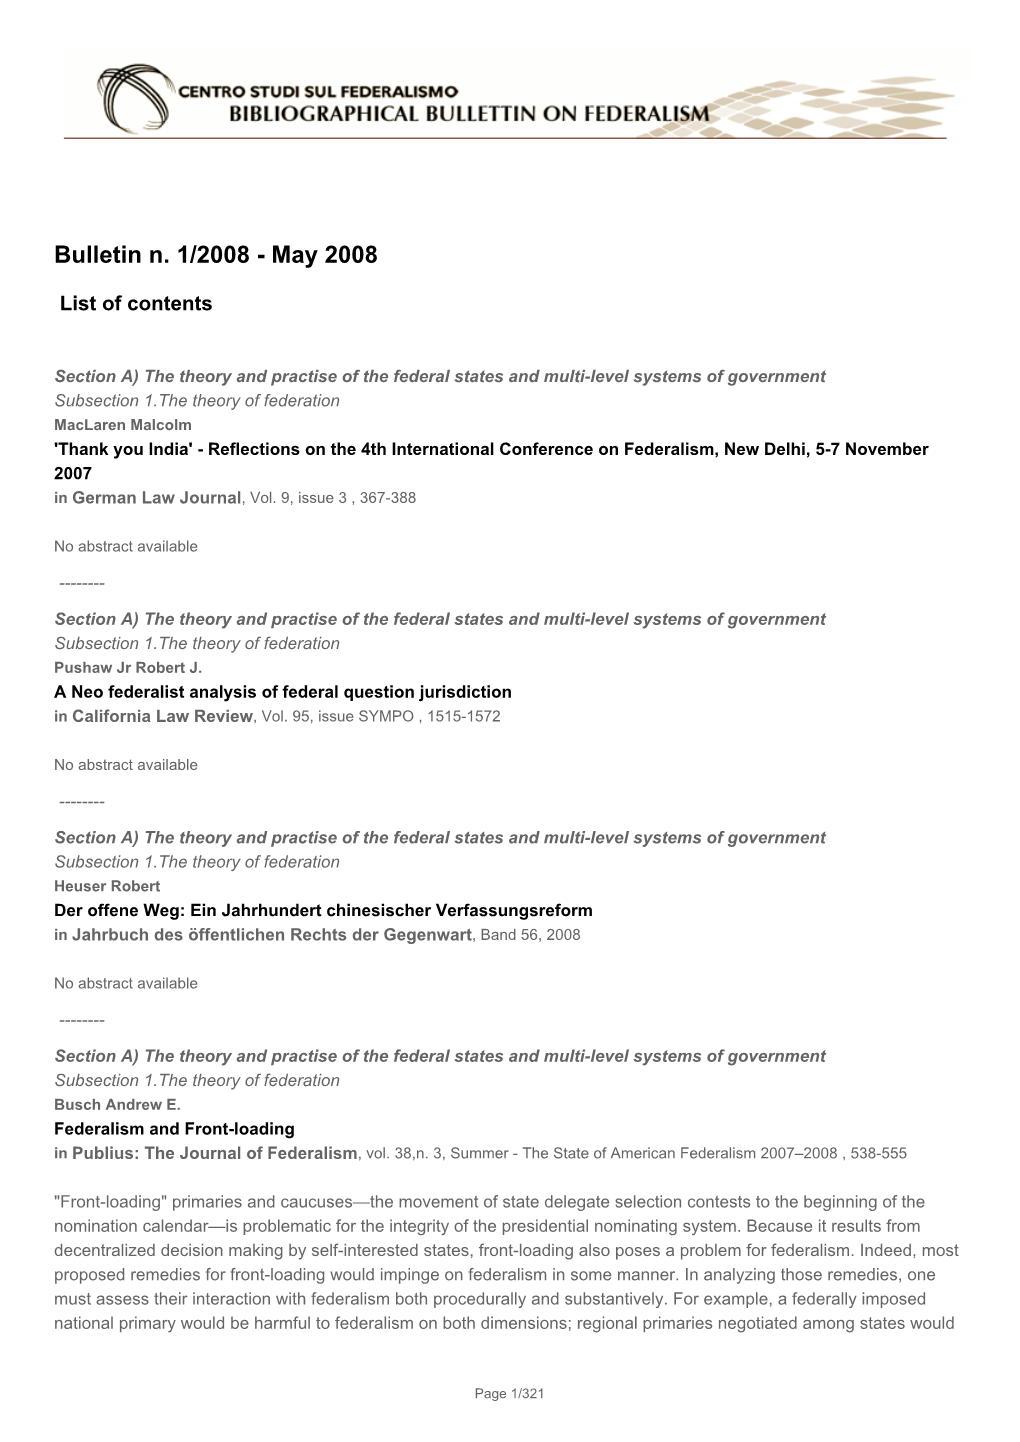 The Bibliographical Bulletin on Federalism